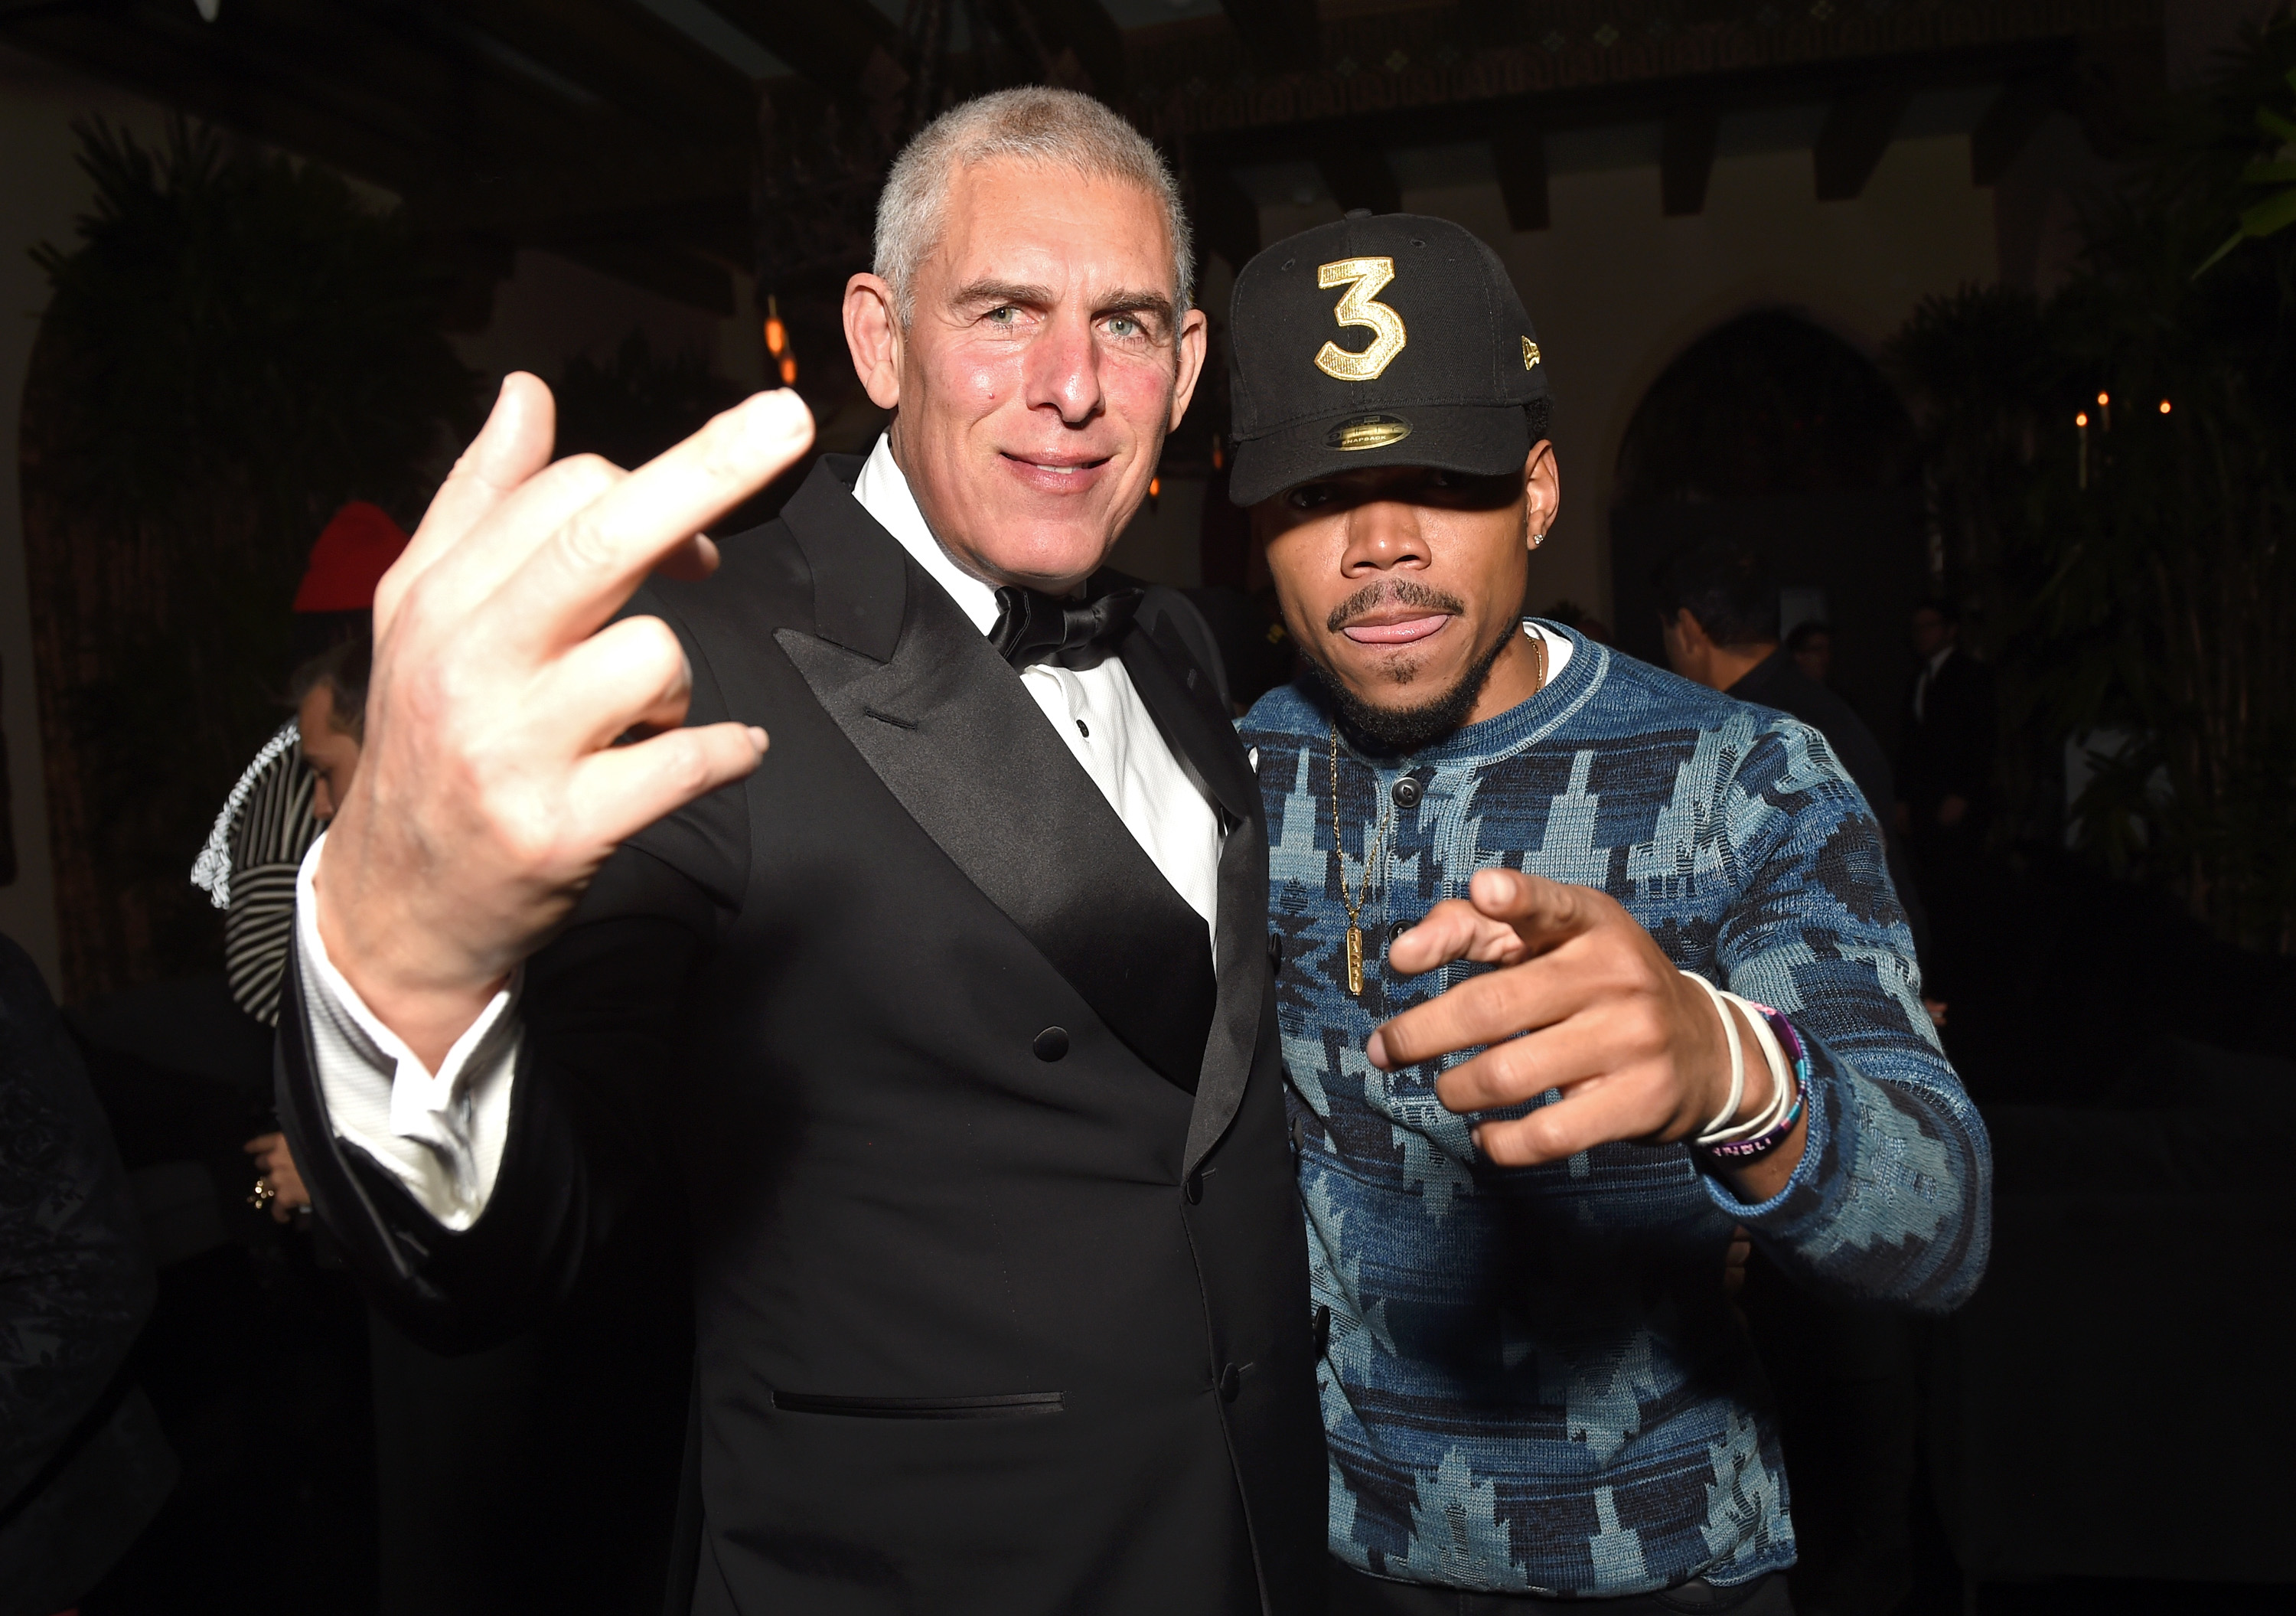 Youtube Head of Global Music Lyor Cohen raises his middle finger to the camera while standing beside Chance the Rapper, who points to the camera. 